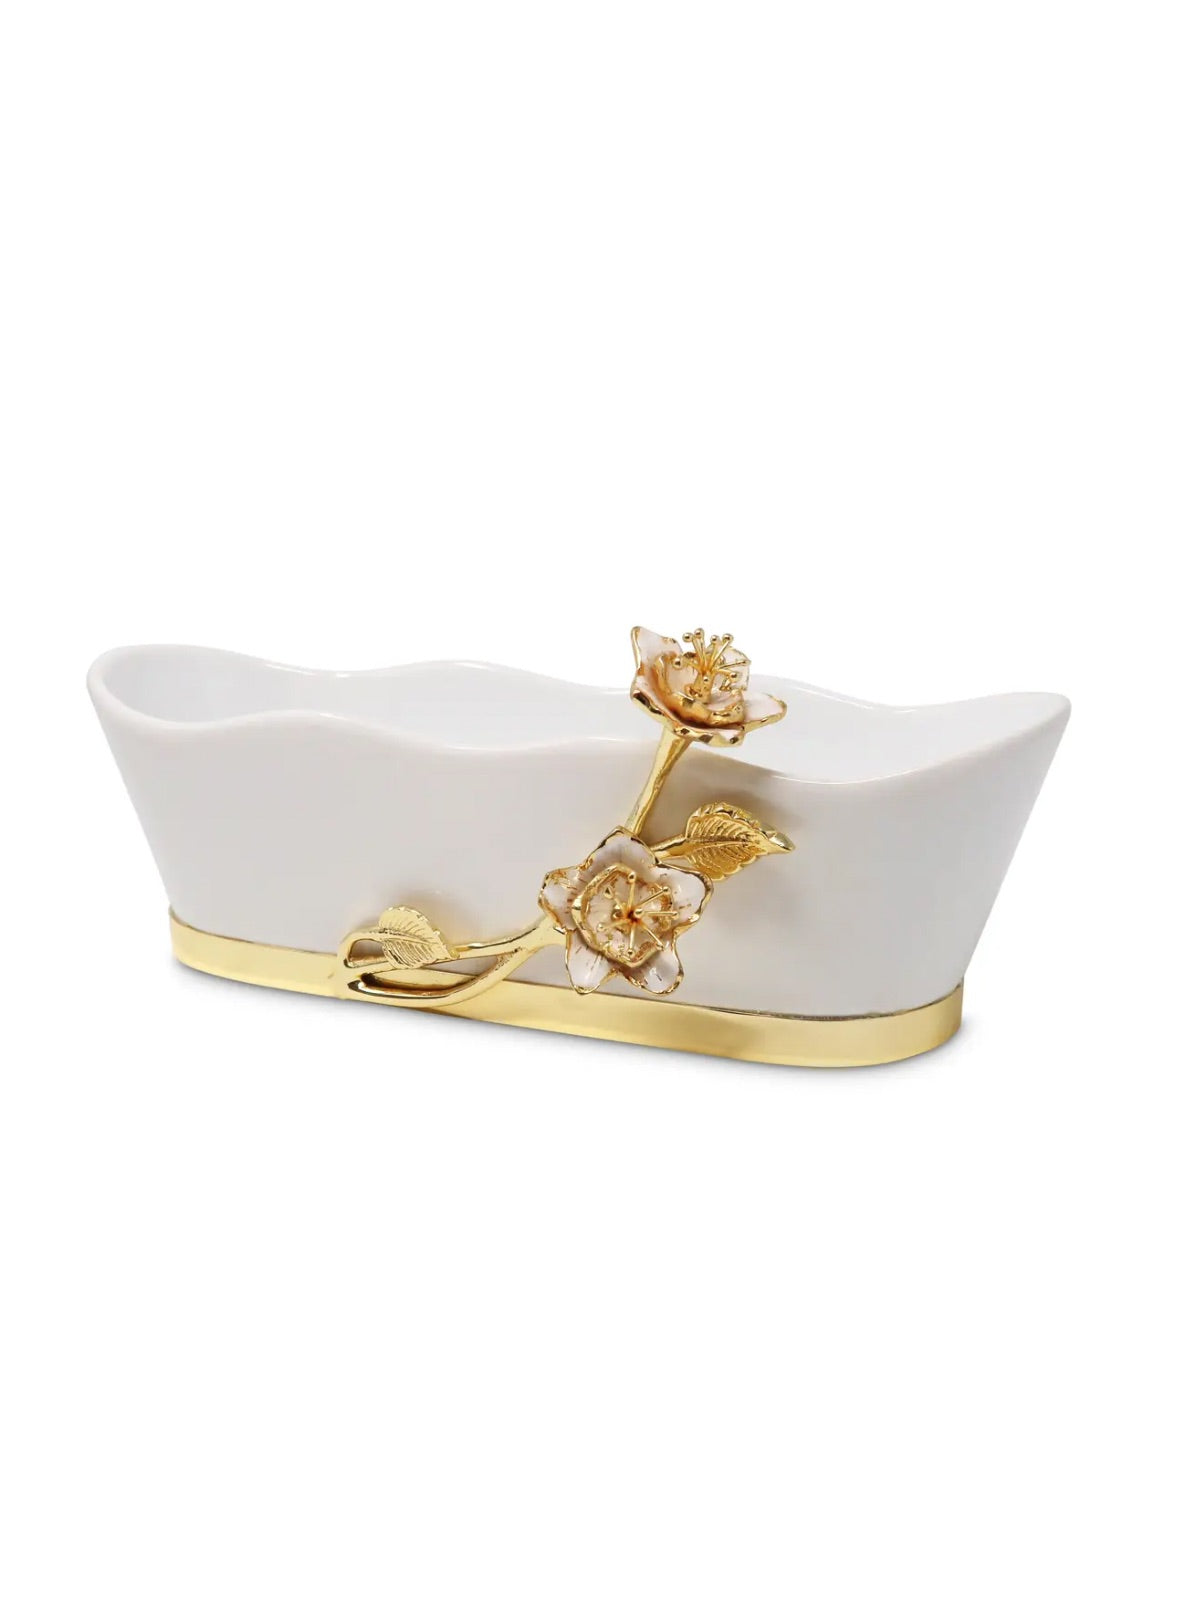 White Porcelain Rectangle Bowl with Stunning Gold Flower Detail, 11 inches. 